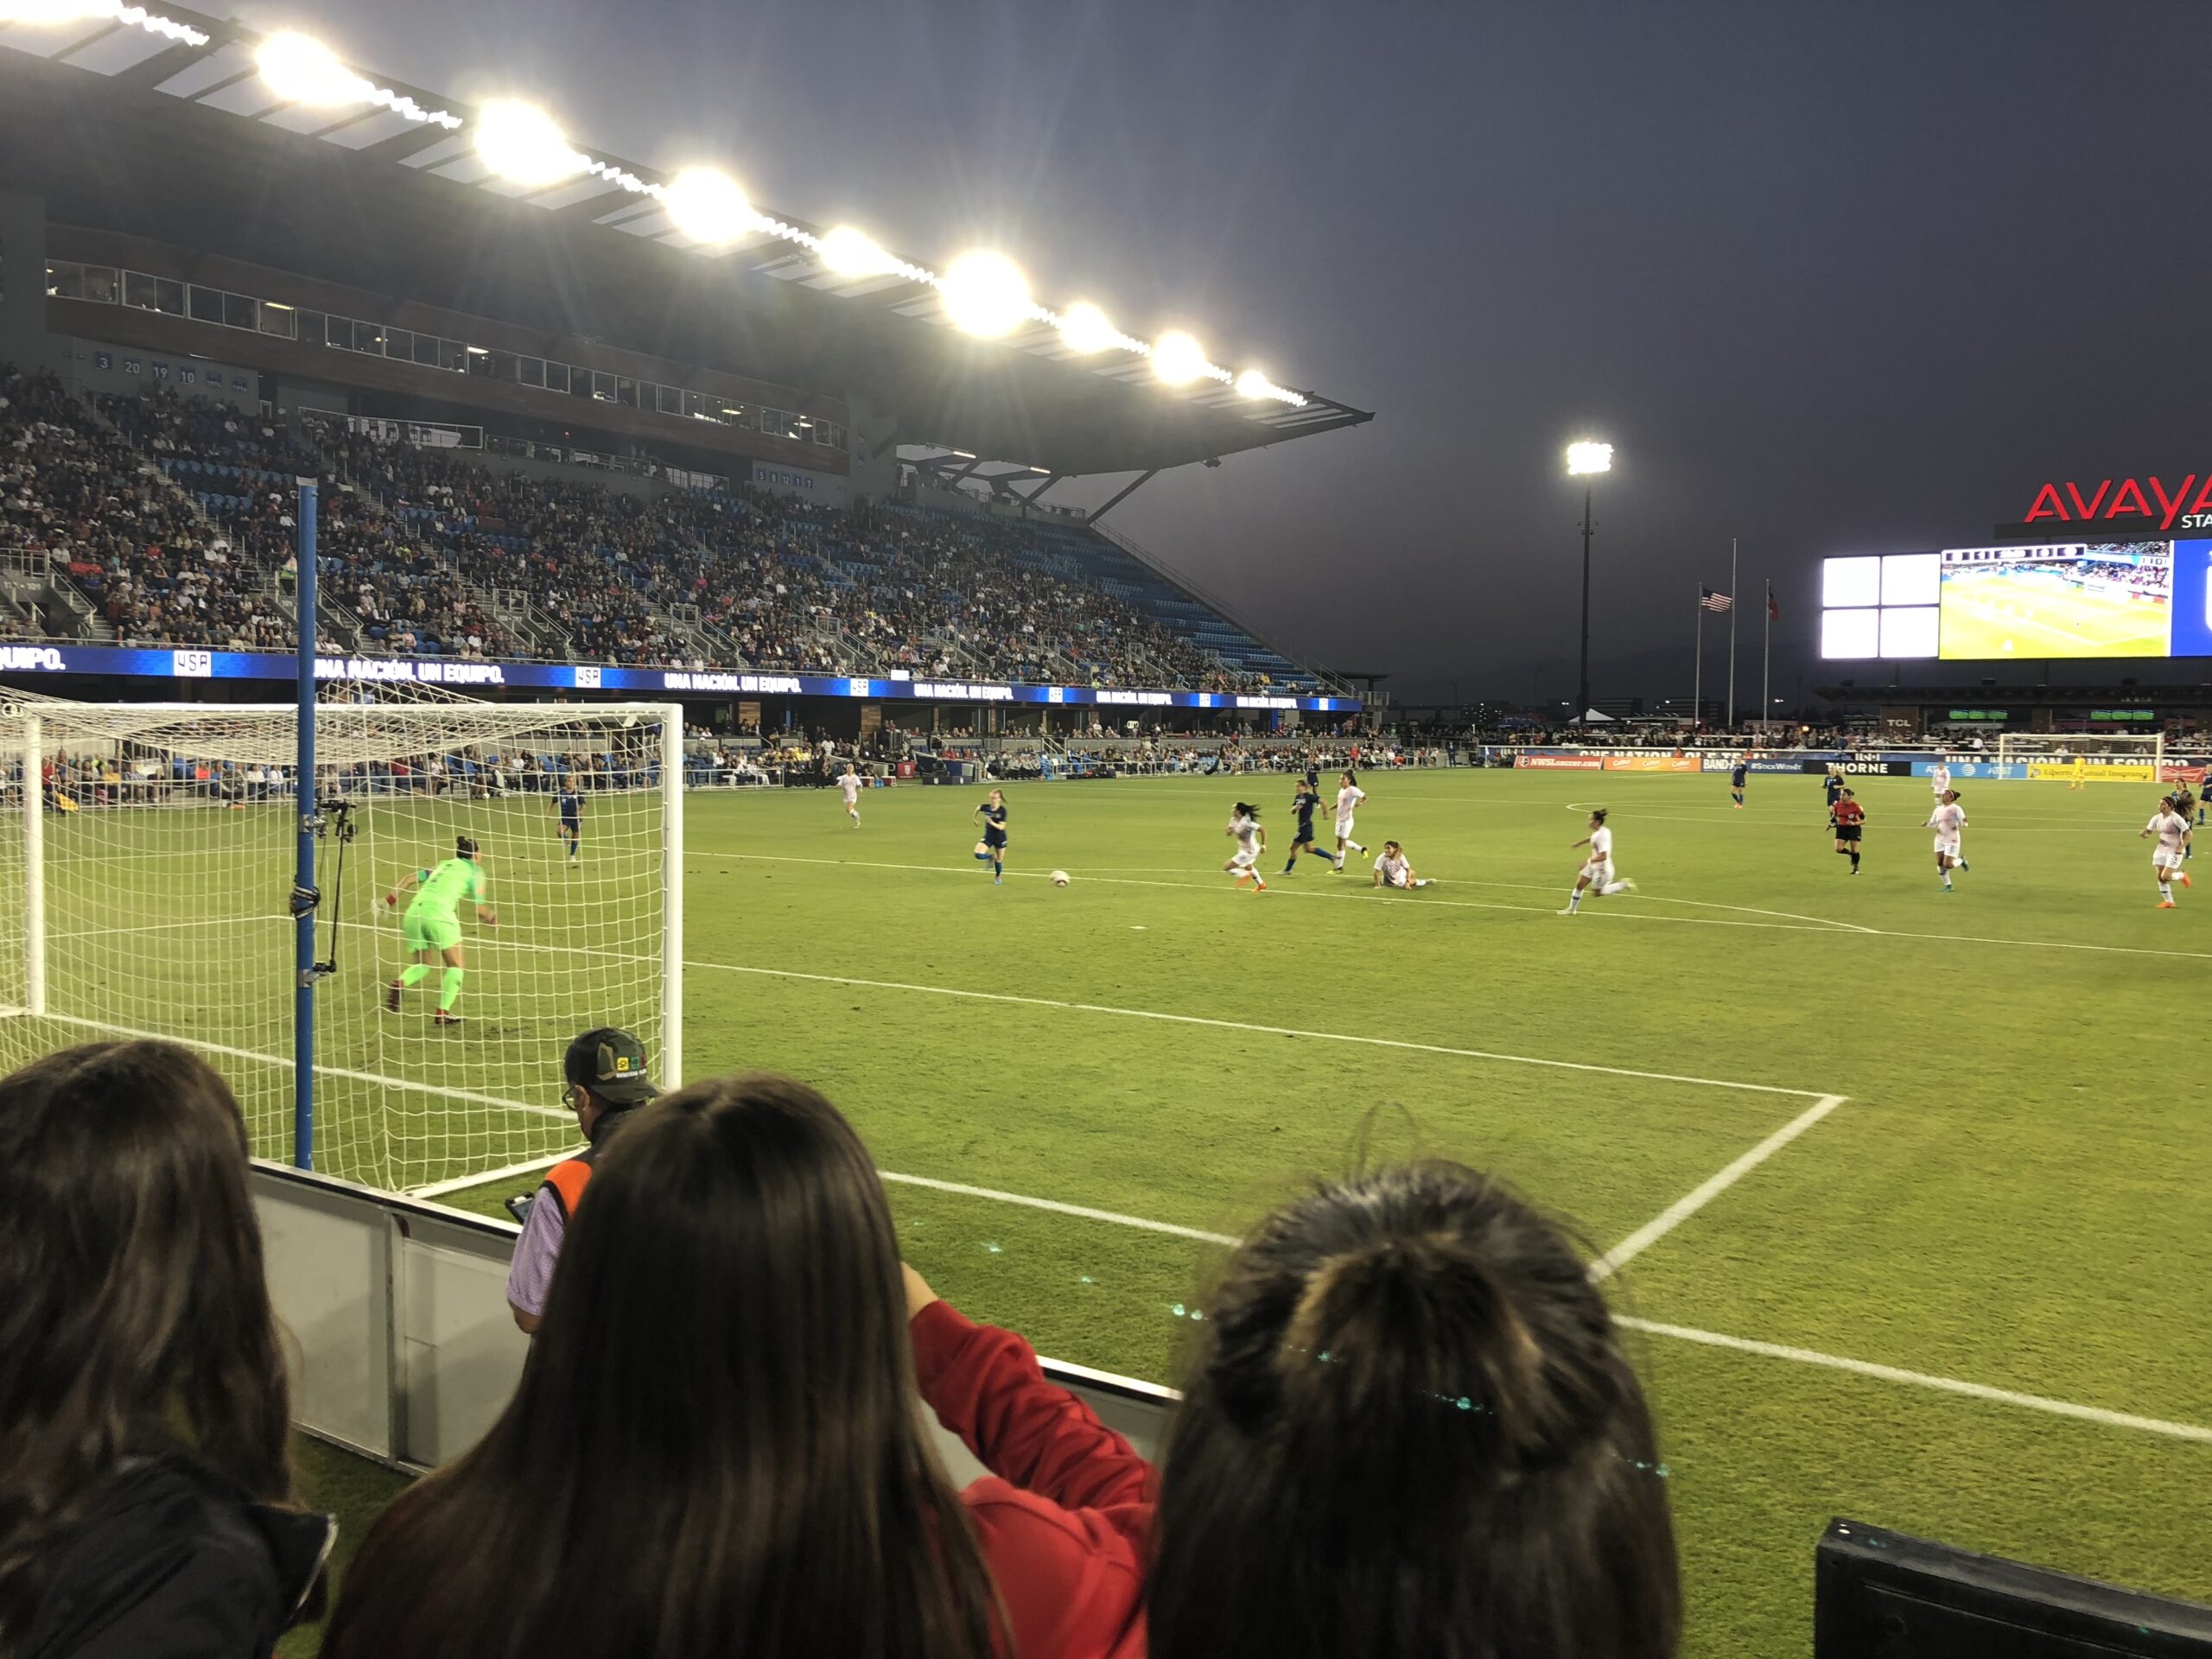 Field level view of Avaya Stadium (now PayPal Park) during US Women's National Team game, Sept 4, 2018 against Chile.